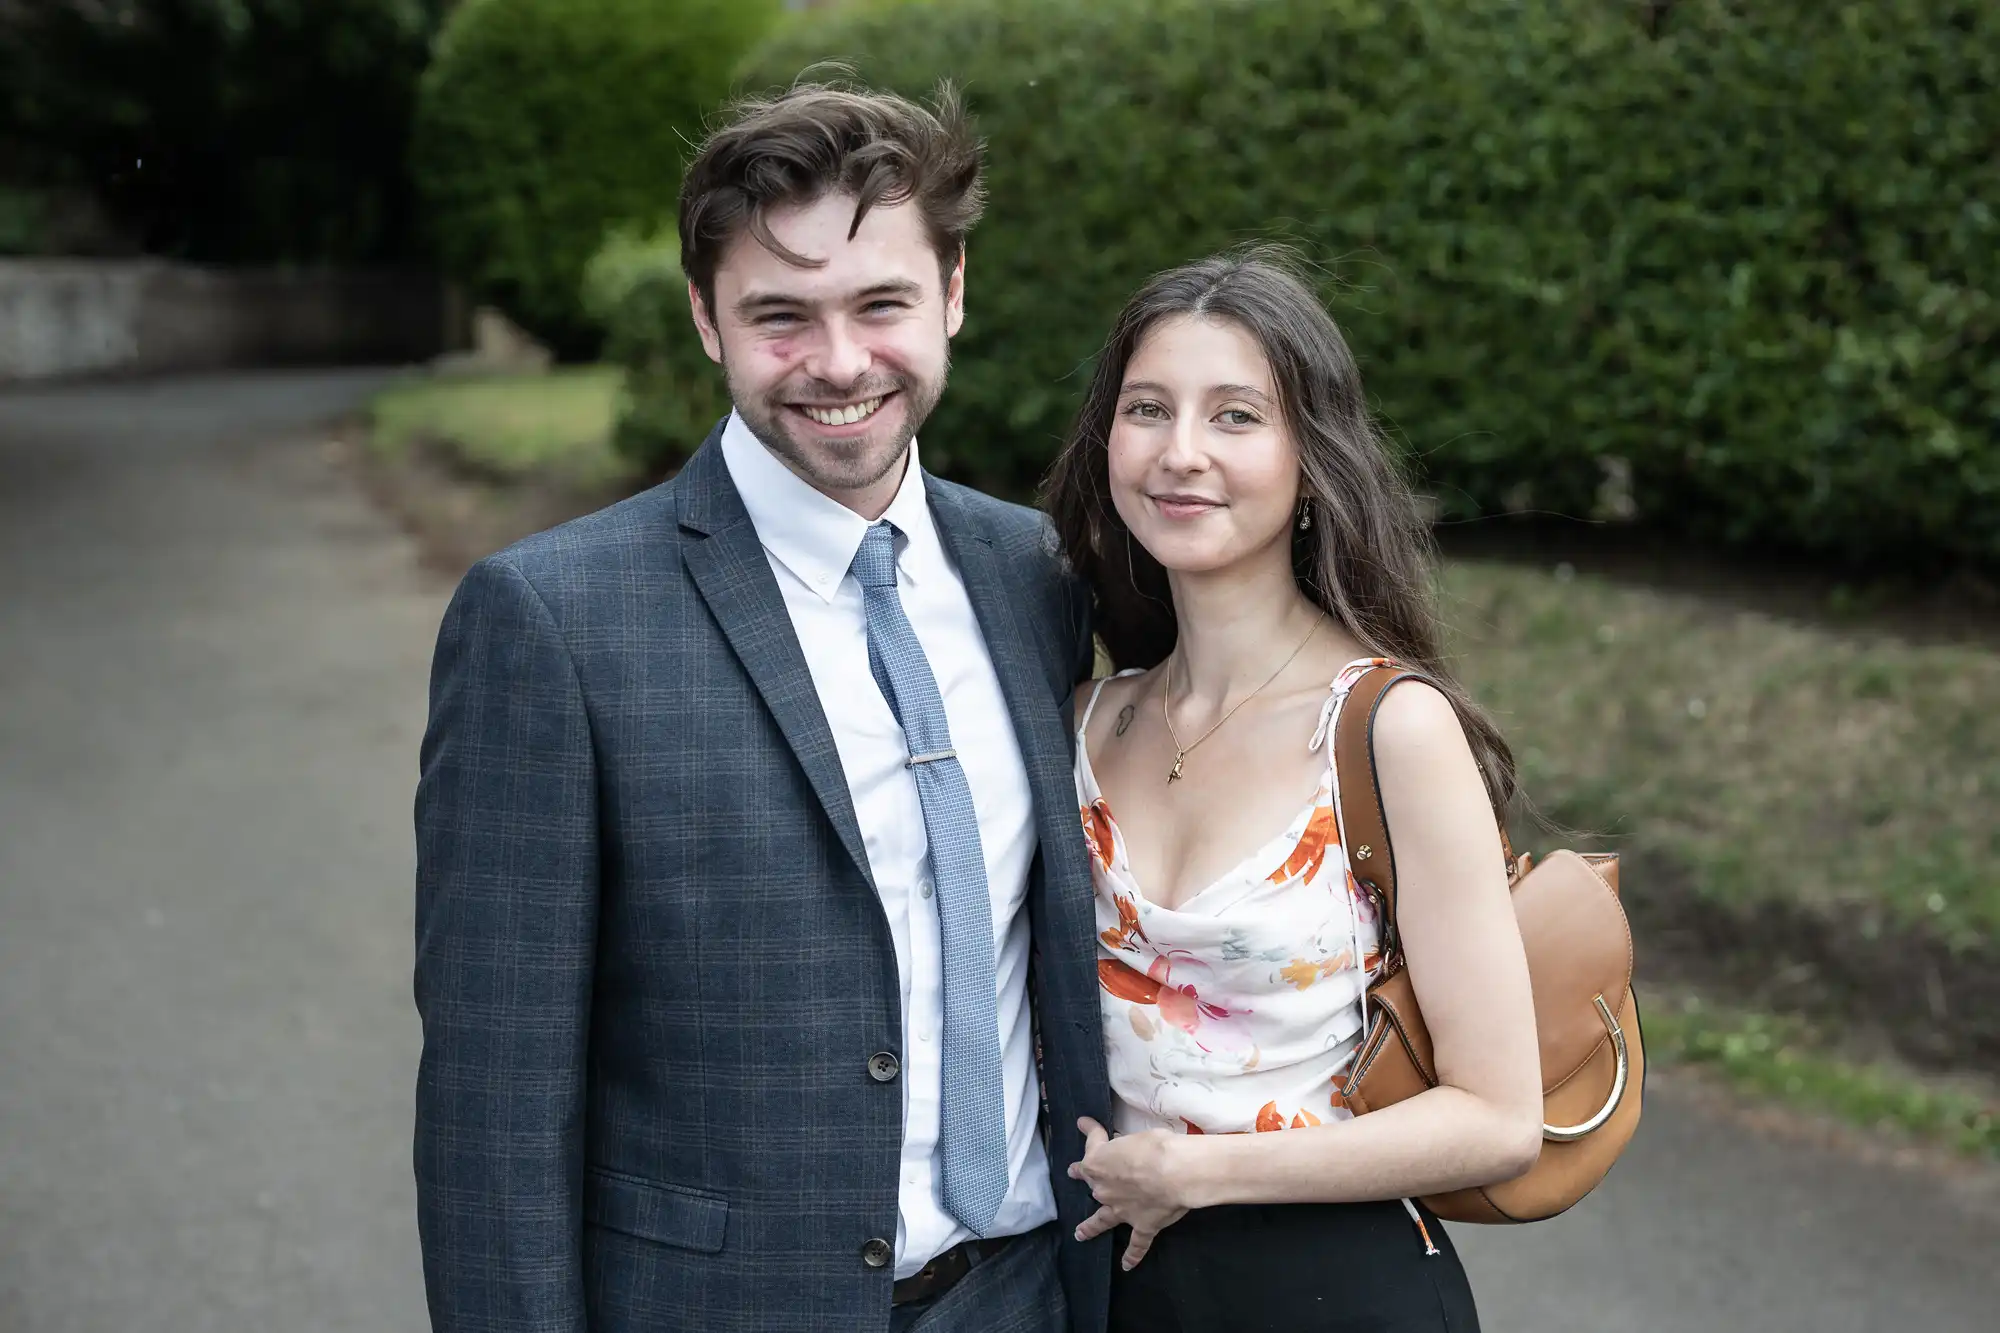 A smiling couple, the man in a grey suit and the woman in a floral dress, standing on a path with green bushes in the background.